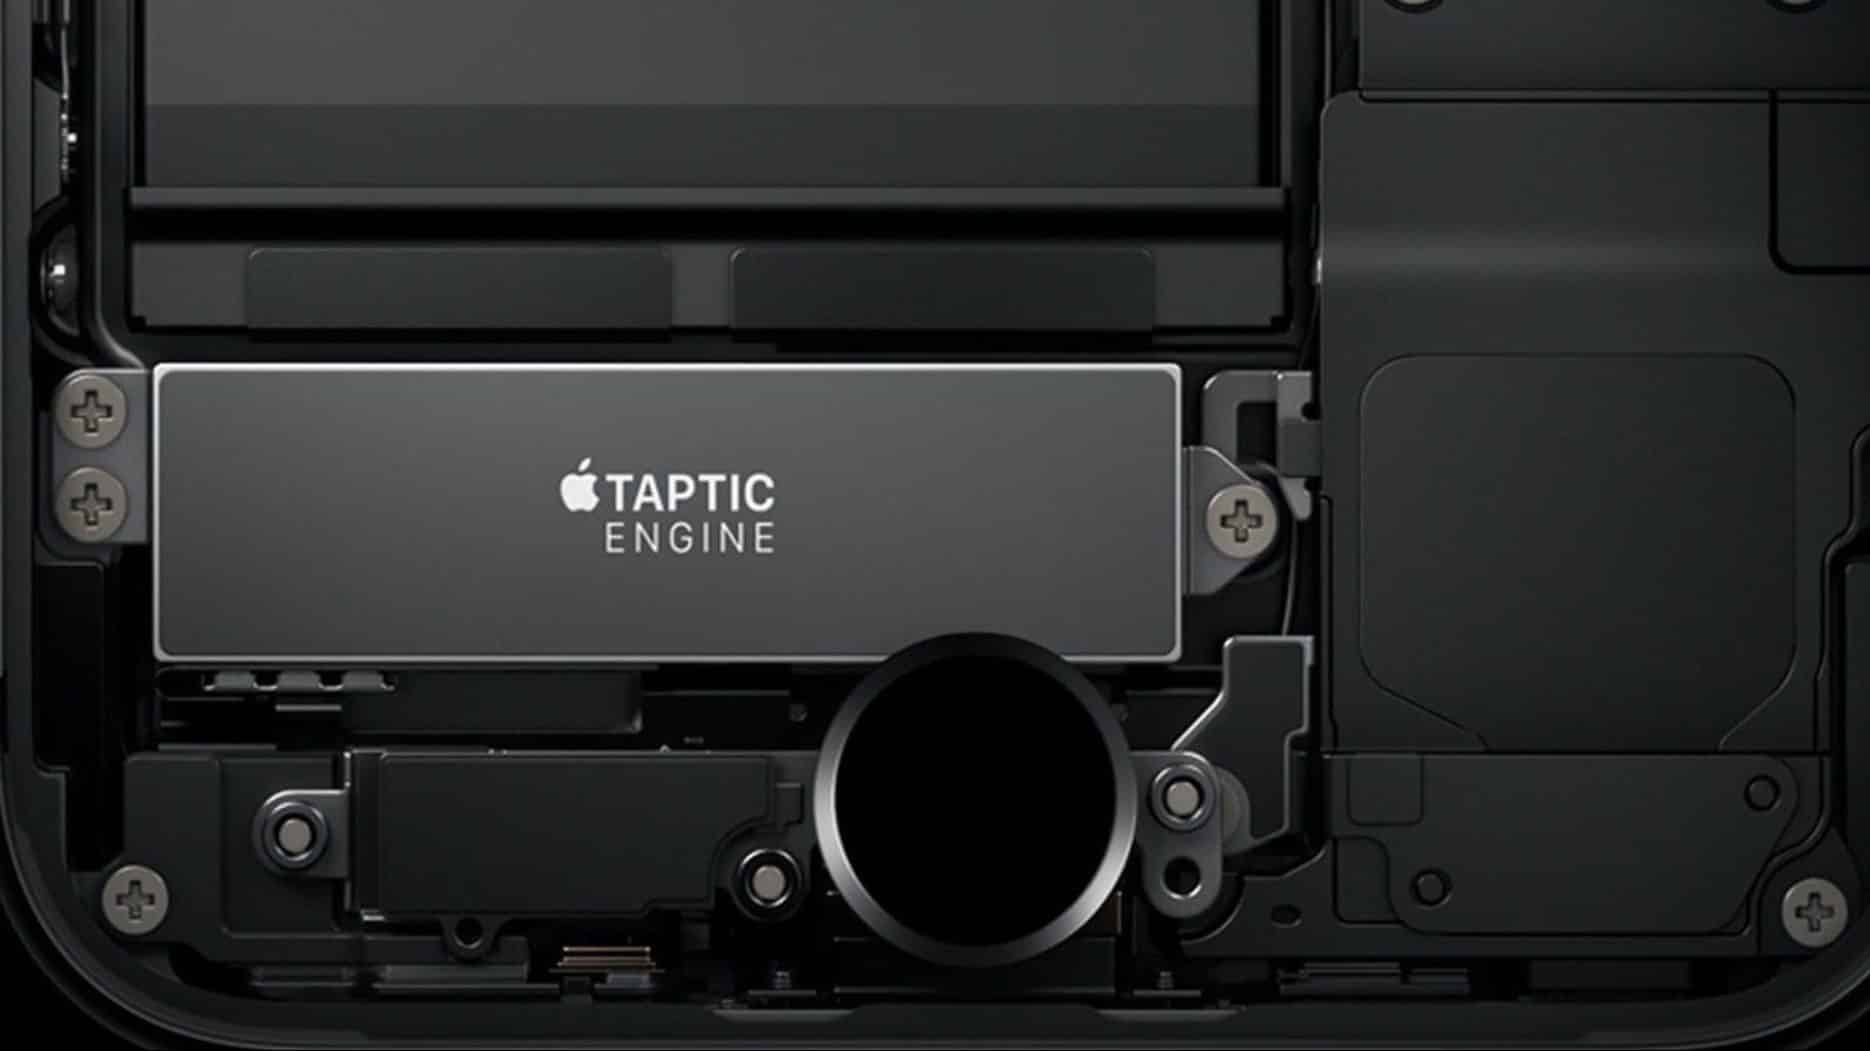 Apple files patent for new Taptic Engine with Inductance Sensor